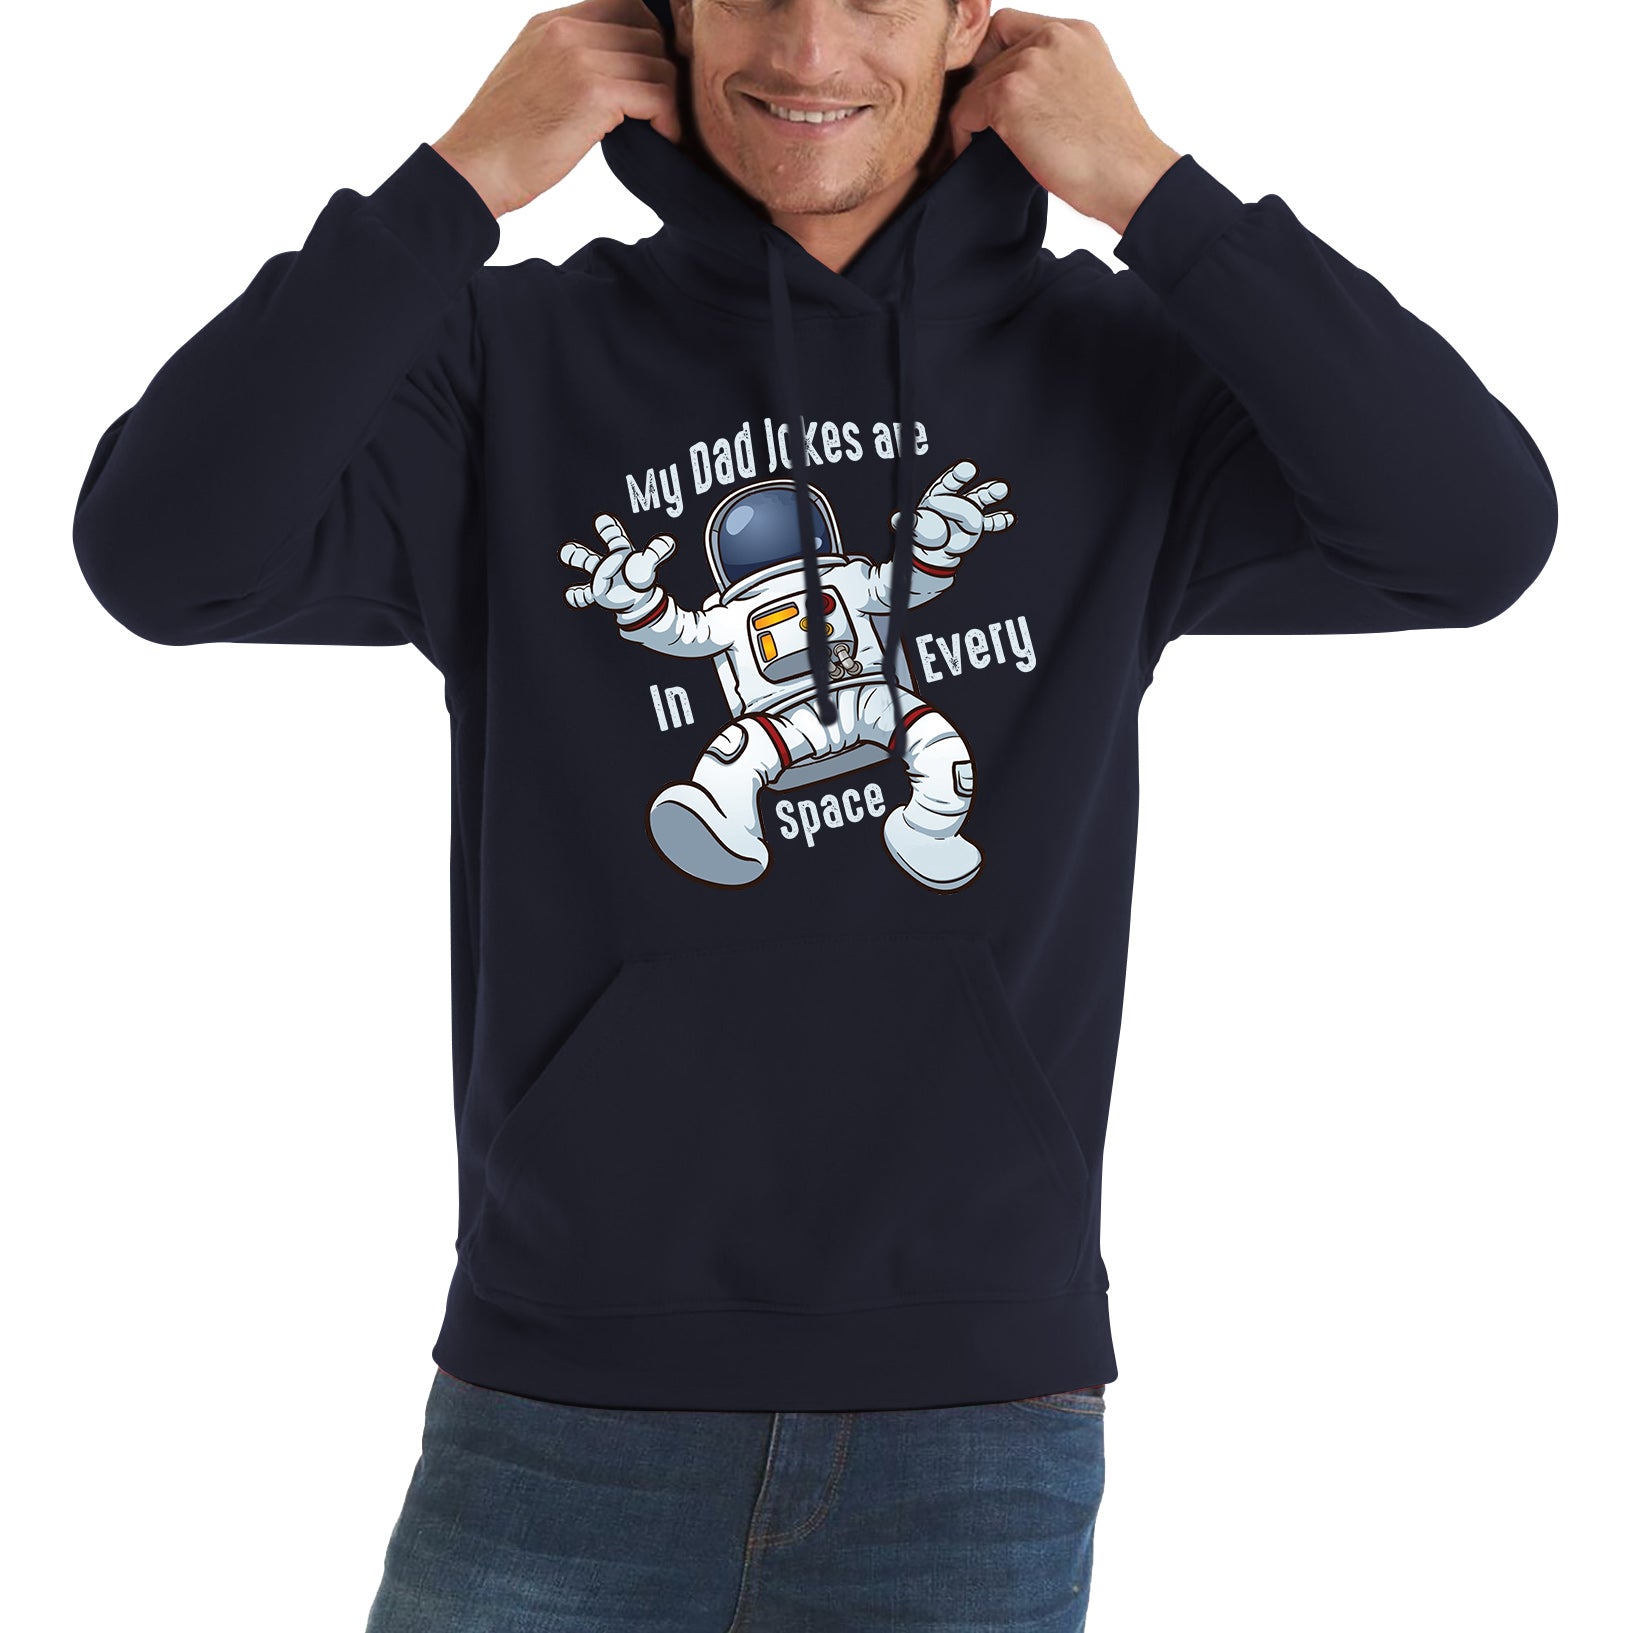 My Dad Jokes Are In Every Space - Falling Astronaut Funny Sarcastic Joke Meme Gift For Father Scientific Meme Joke Space Unisex Hoodie